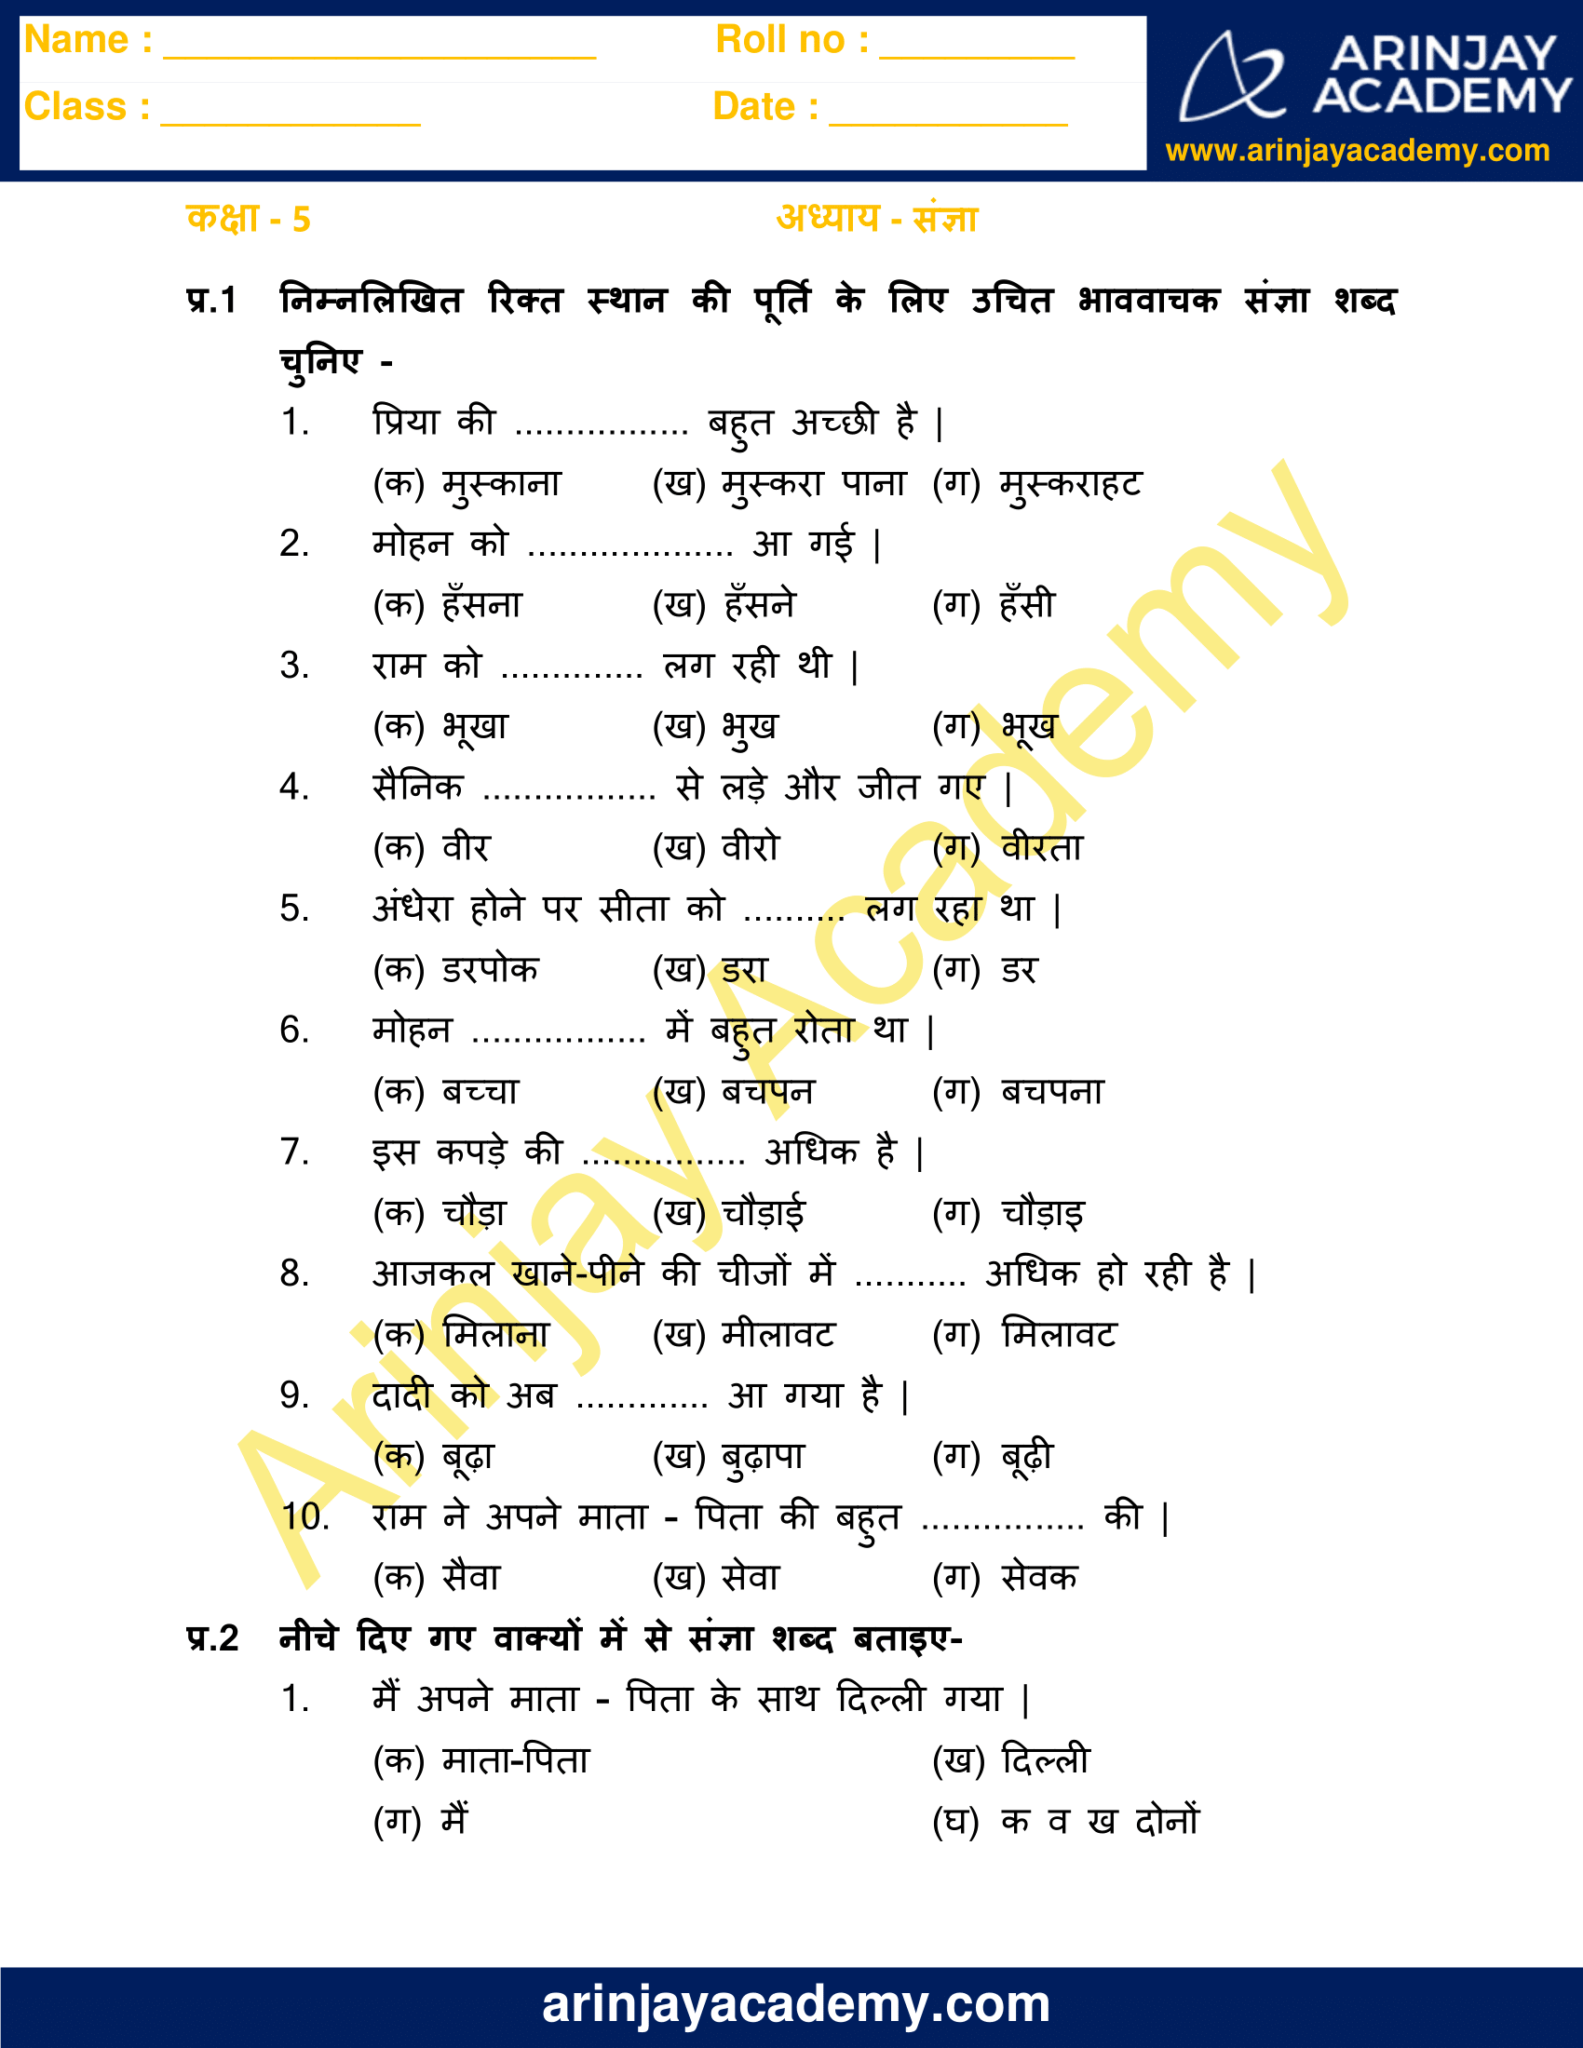 sangya worksheet for class 5 free and printable